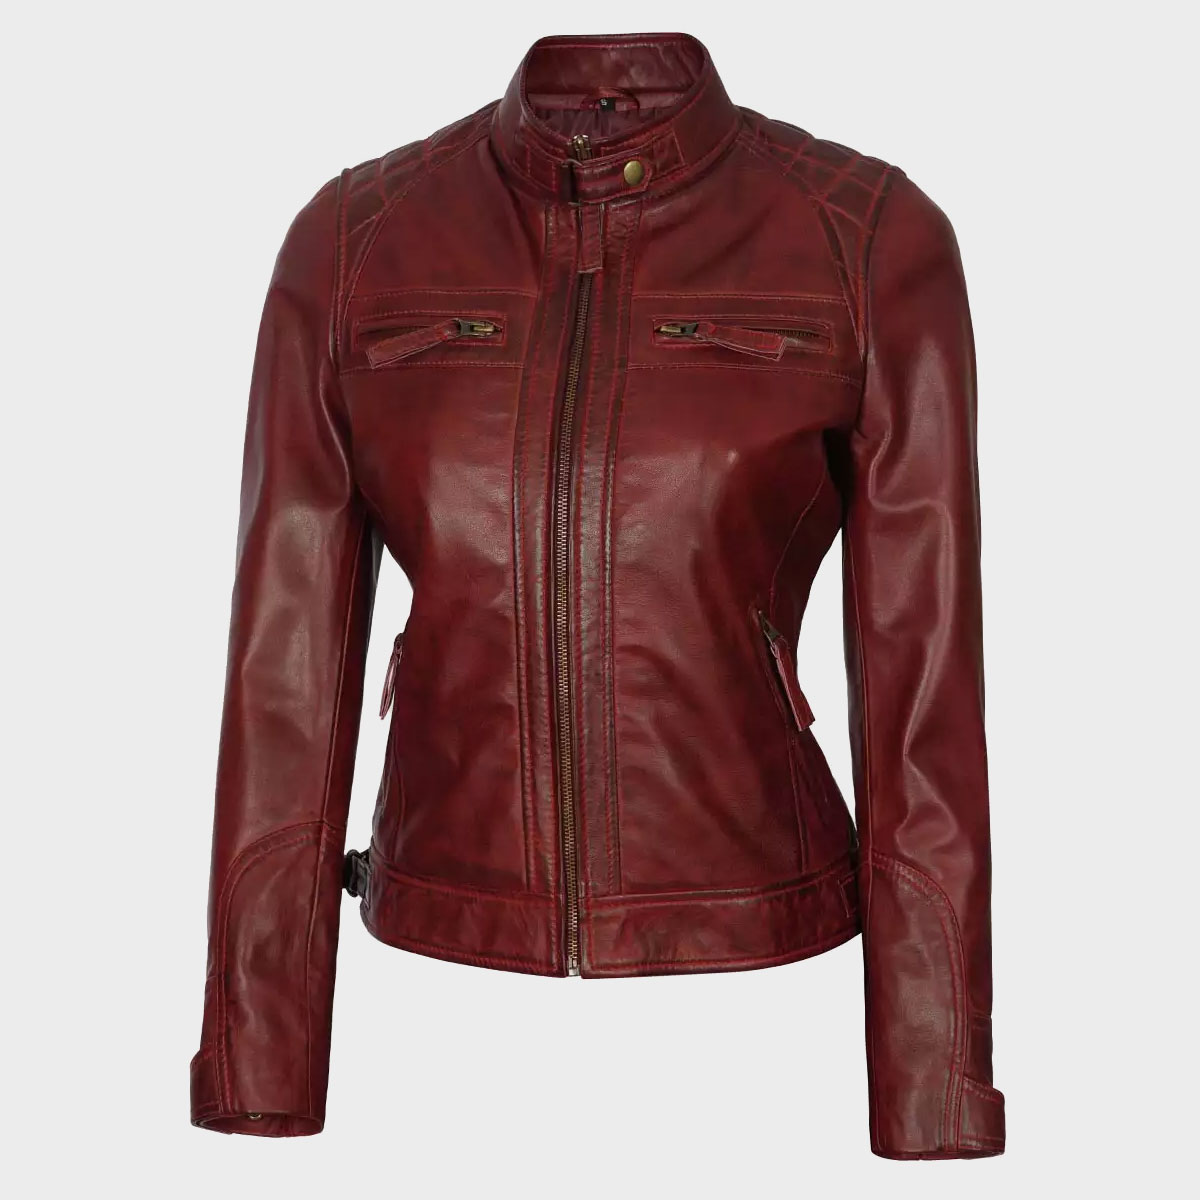 Womens-Vegan-Leather-Maroon-Quilted-Motorcycle-Jacket6566454646